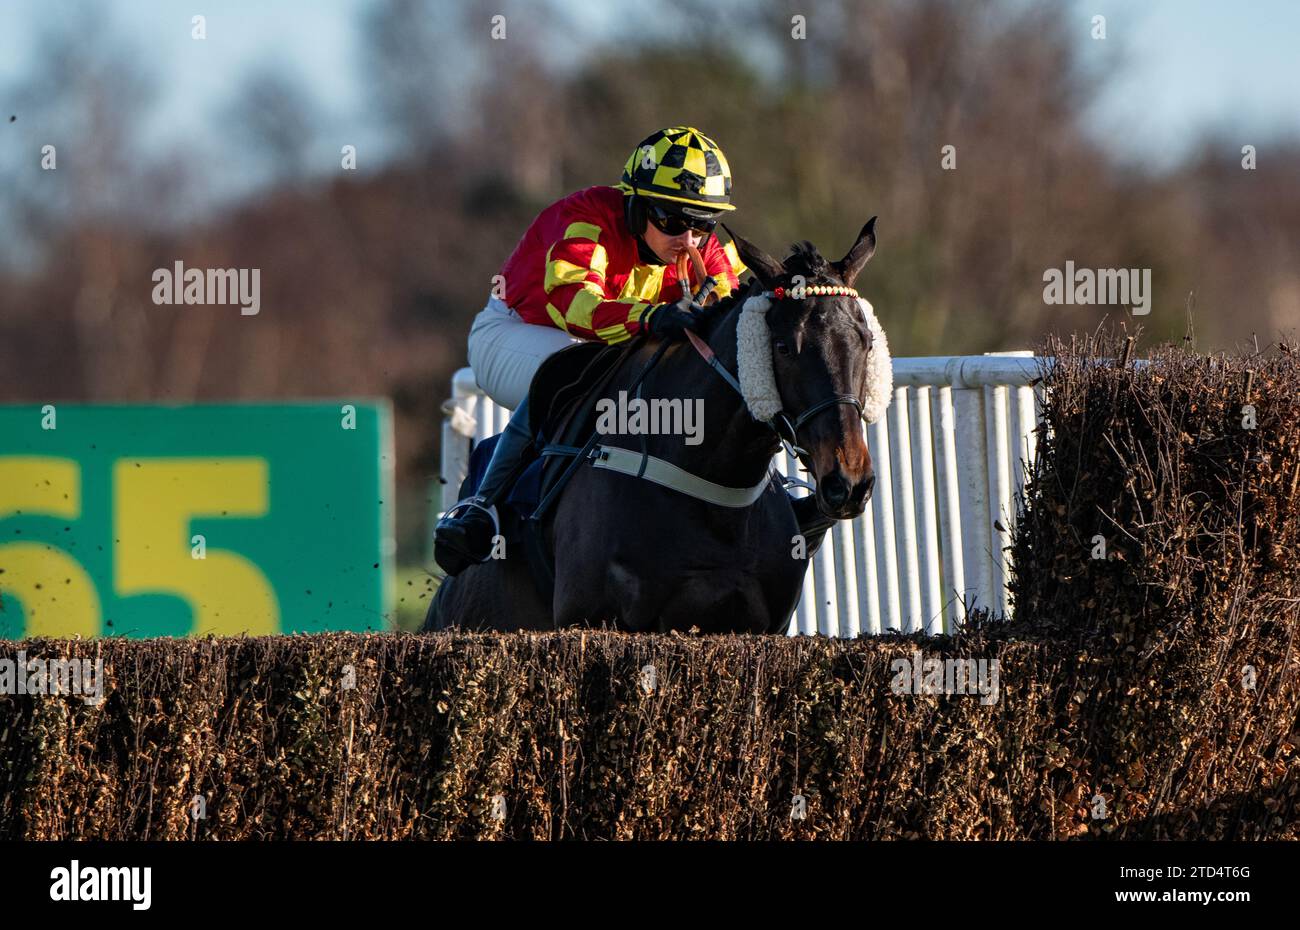 Doncaster, UK. 16th December, 2023. Doncaster, United Kingdom. Saturday 16th December 2023. Onemorefortheroad and Jack Quinlan win the The 6 Horse Challenge at Bet365 Handicap Steeple Chase for trainer Neil King and owners Rupert Dubai Racing. Credit JTW Equine Images / Alamy Live News Credit: JTW Equine Images/Alamy Live News Stock Photo